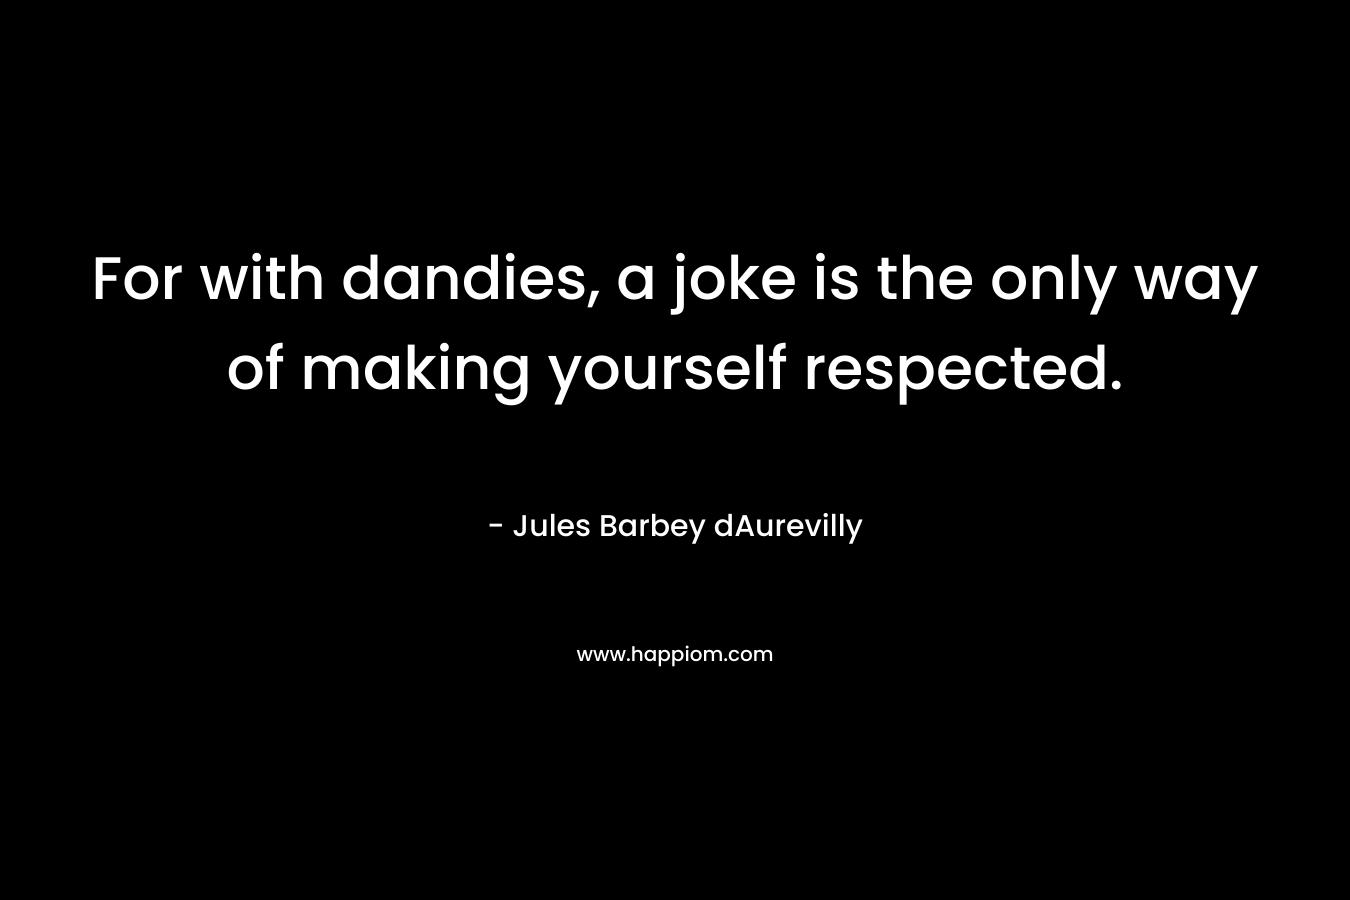 For with dandies, a joke is the only way of making yourself respected. – Jules Barbey dAurevilly